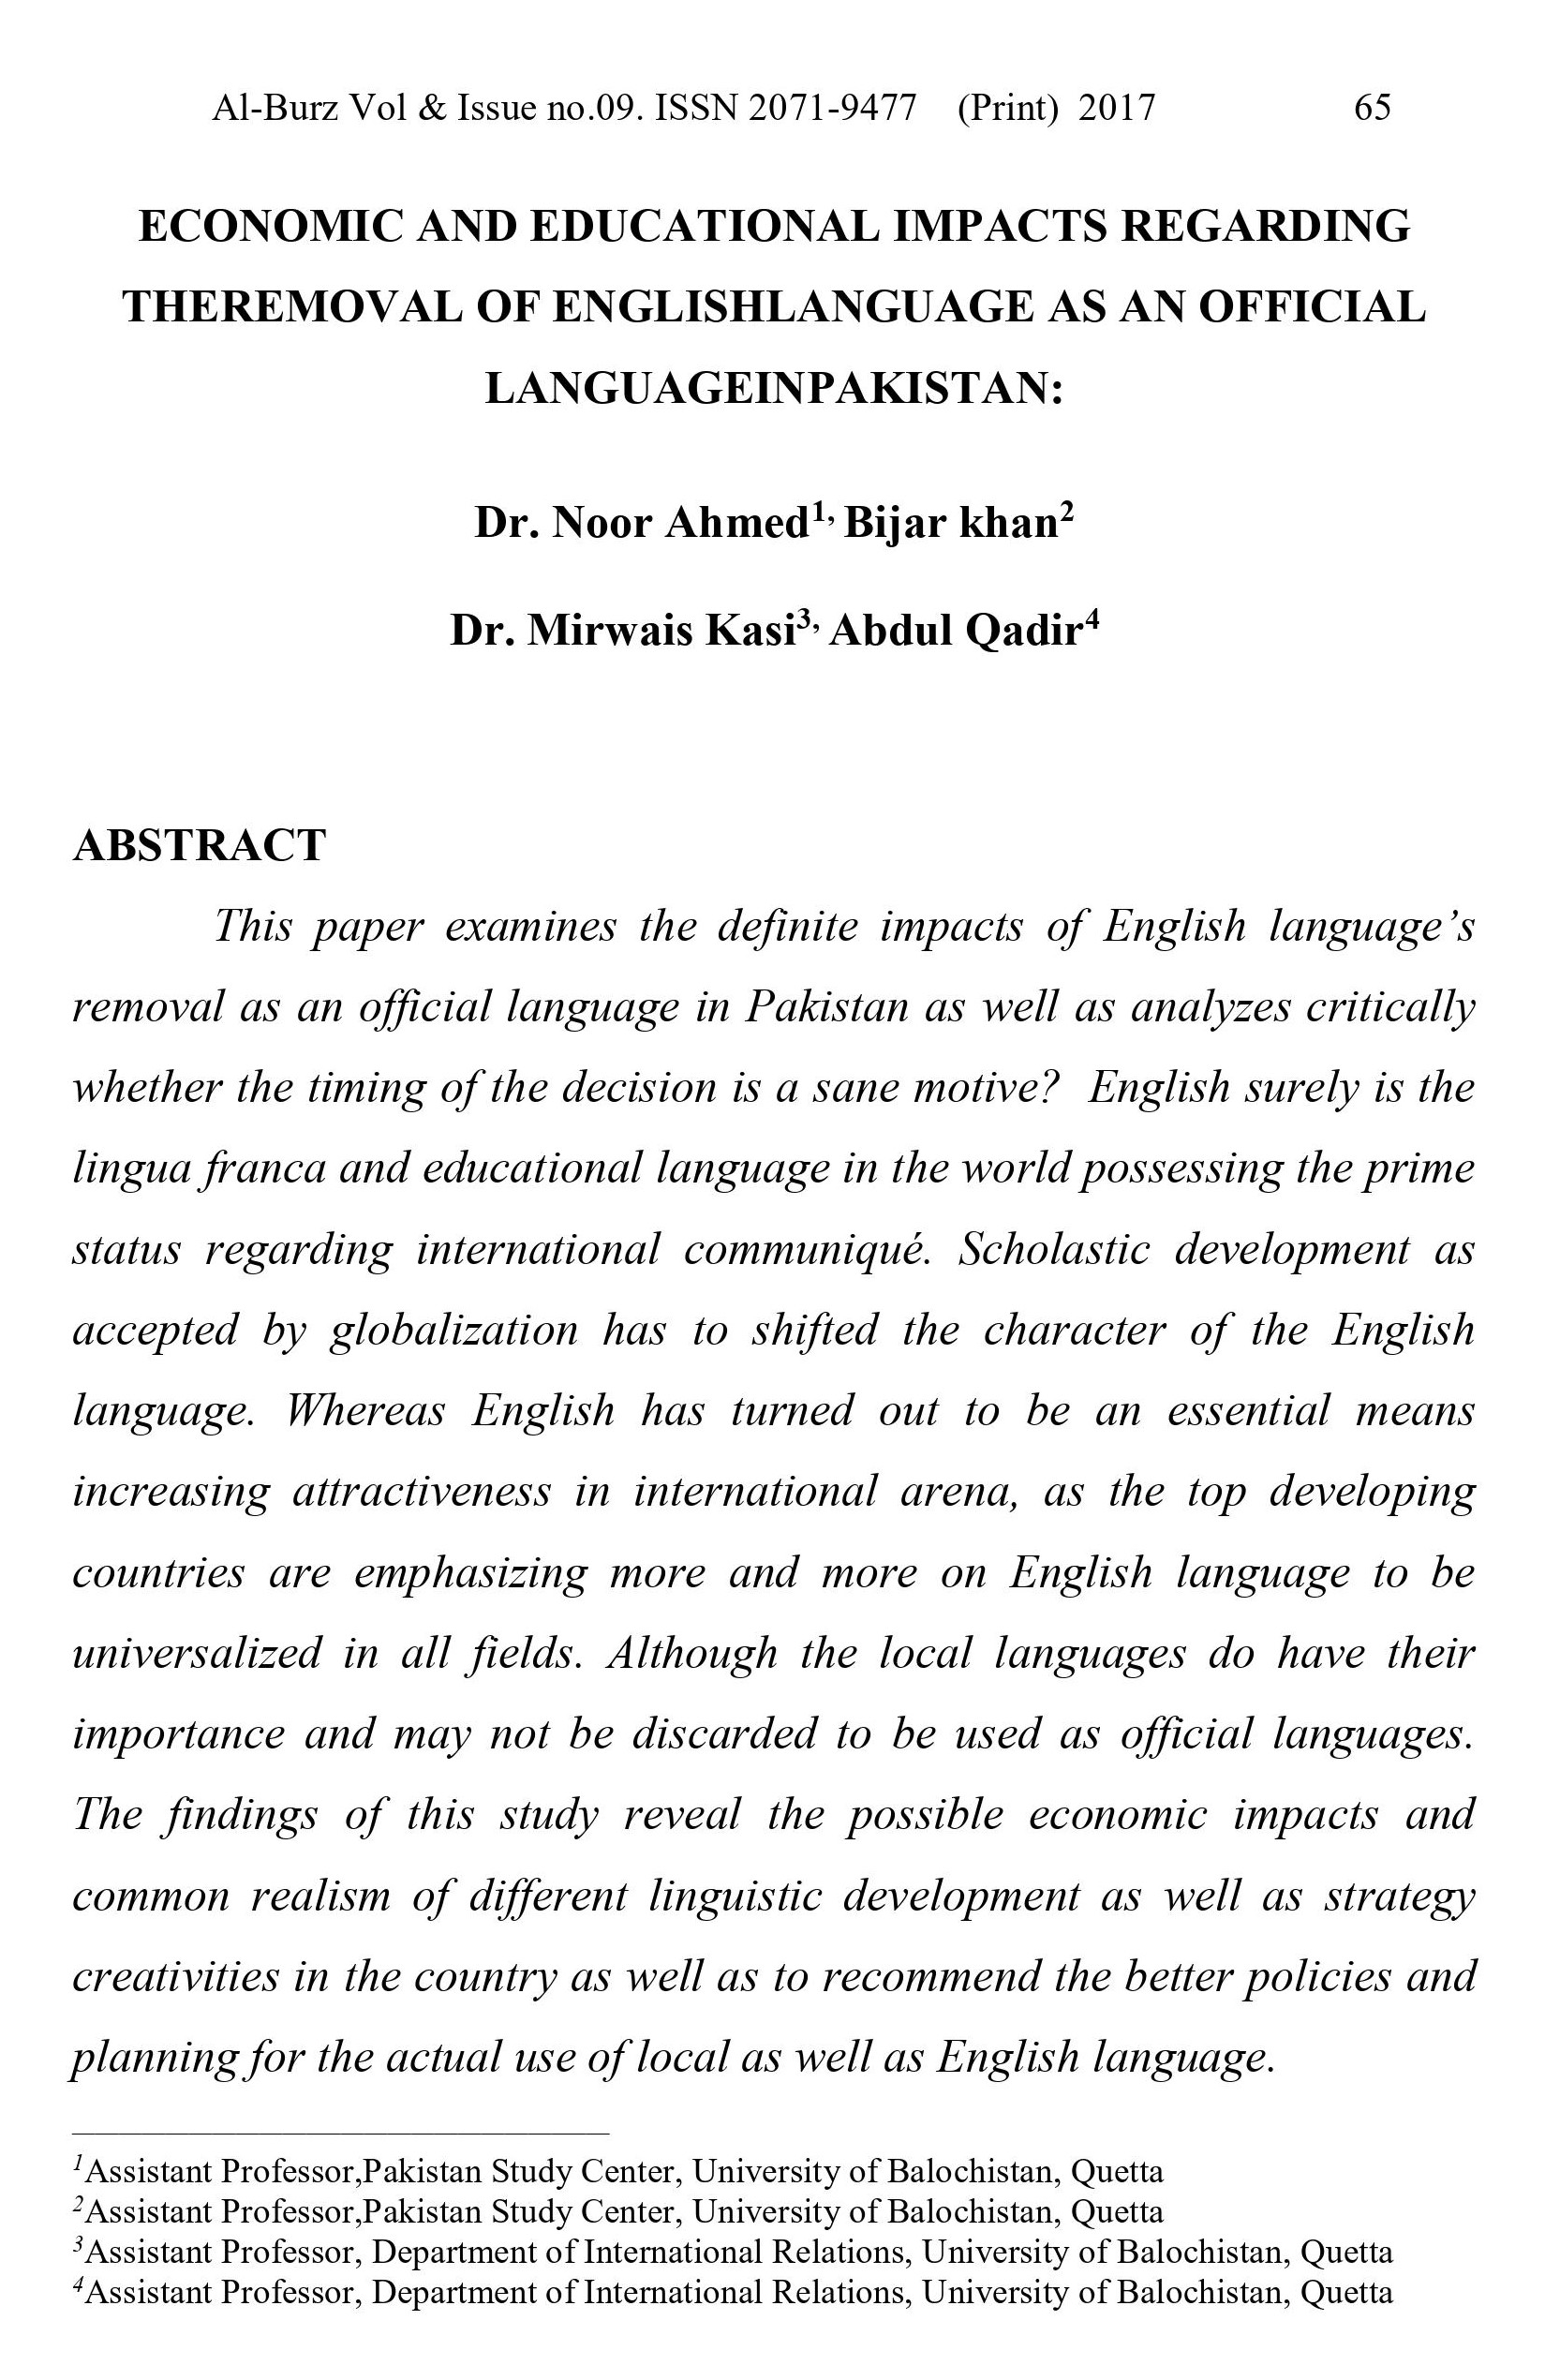 ECONOMIC AND EDUCATIONAL IMPACTS REGARDING THEREMOVAL OF ENGLISHLANGUAGE AS AN OFFICIAL LANGUAGEINPAKISTAN: